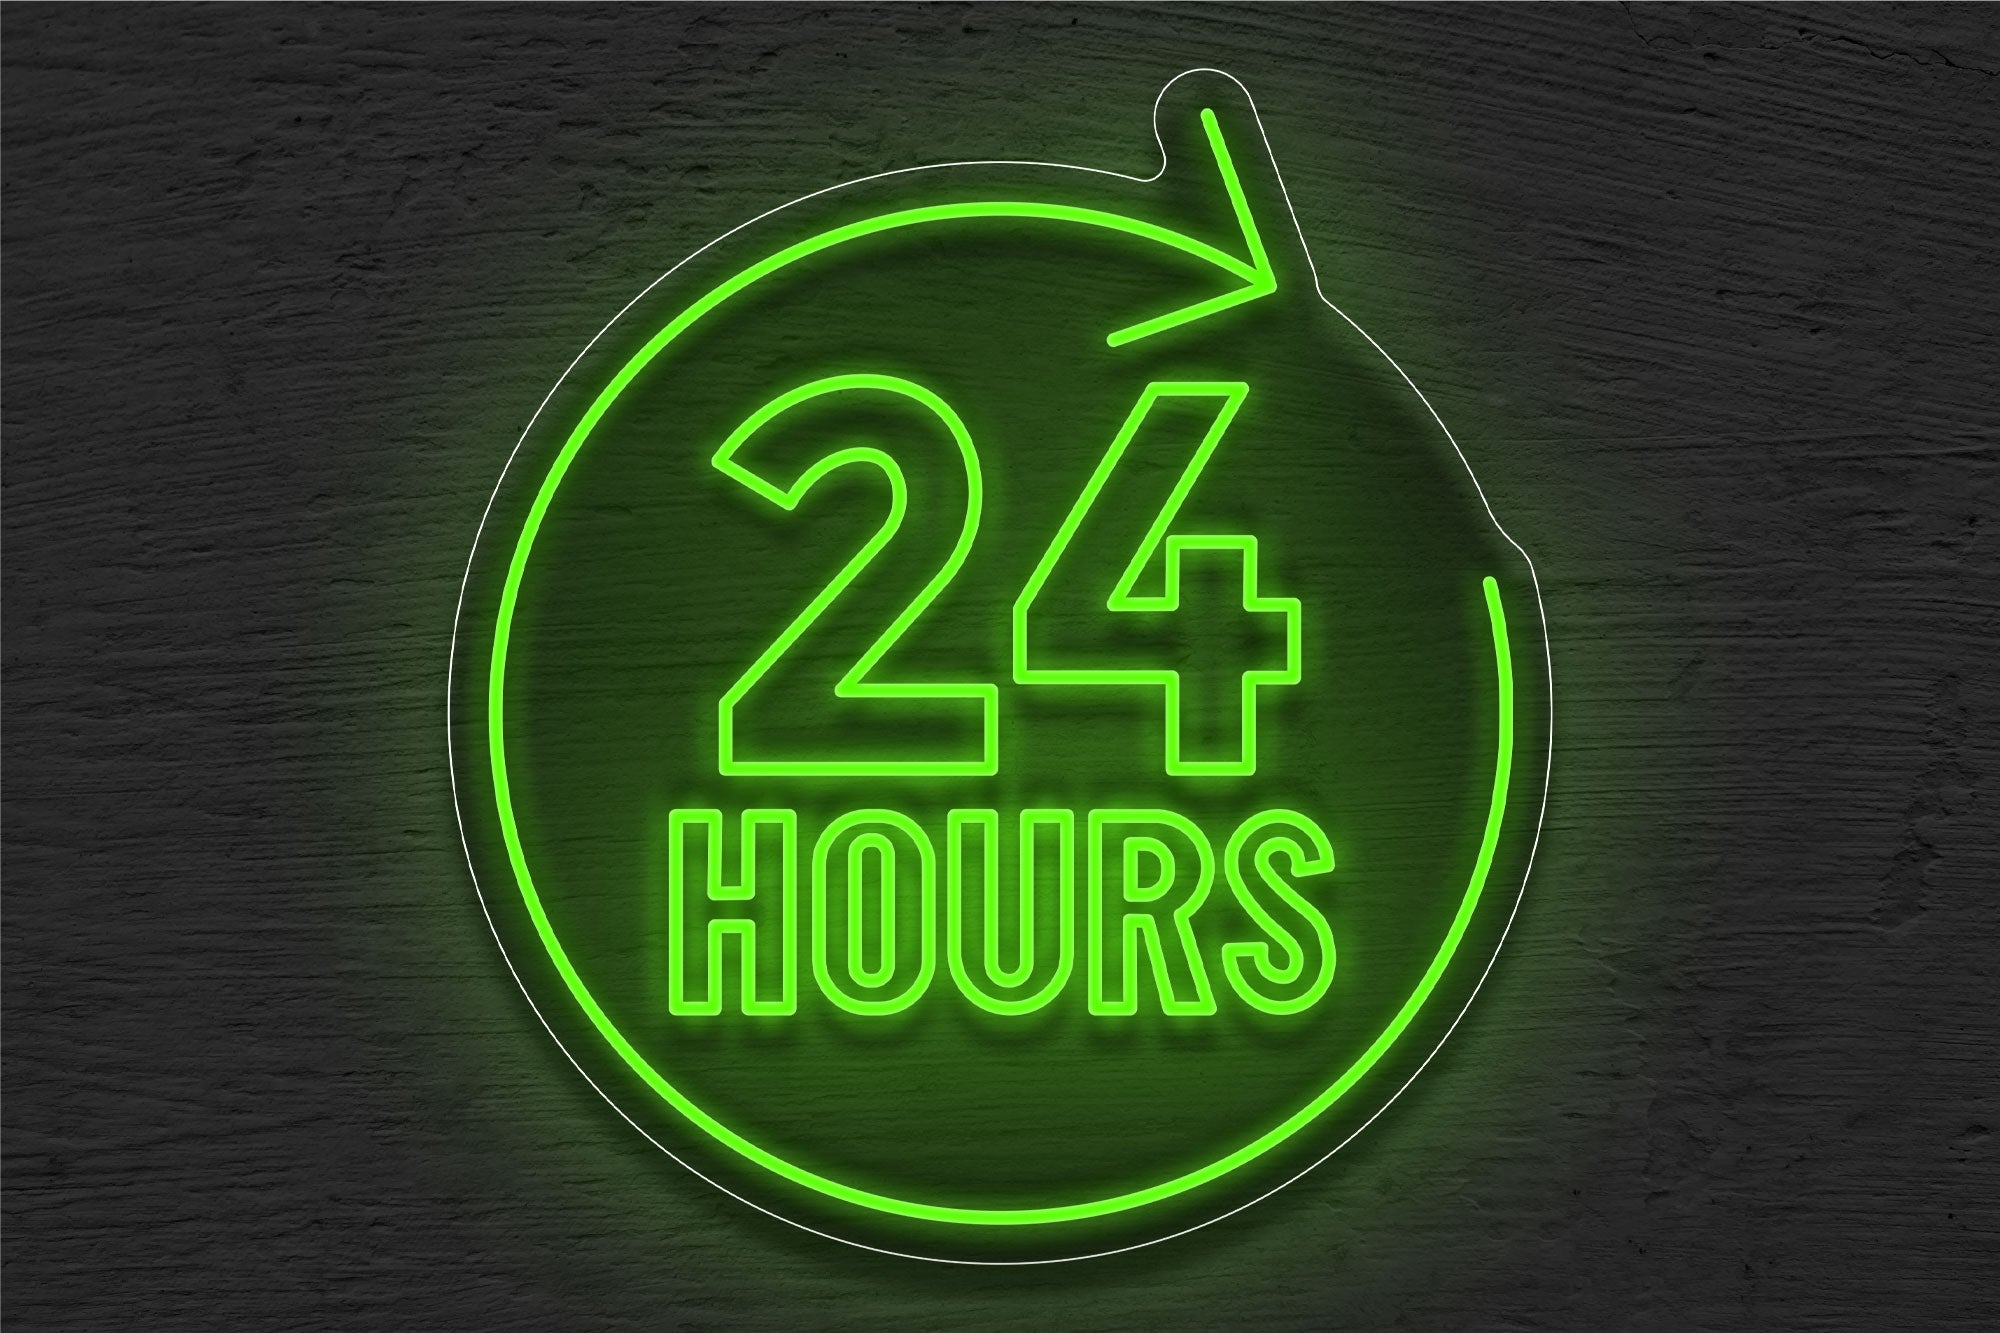 "24 Hours" with Arrow border LED Neon Sign